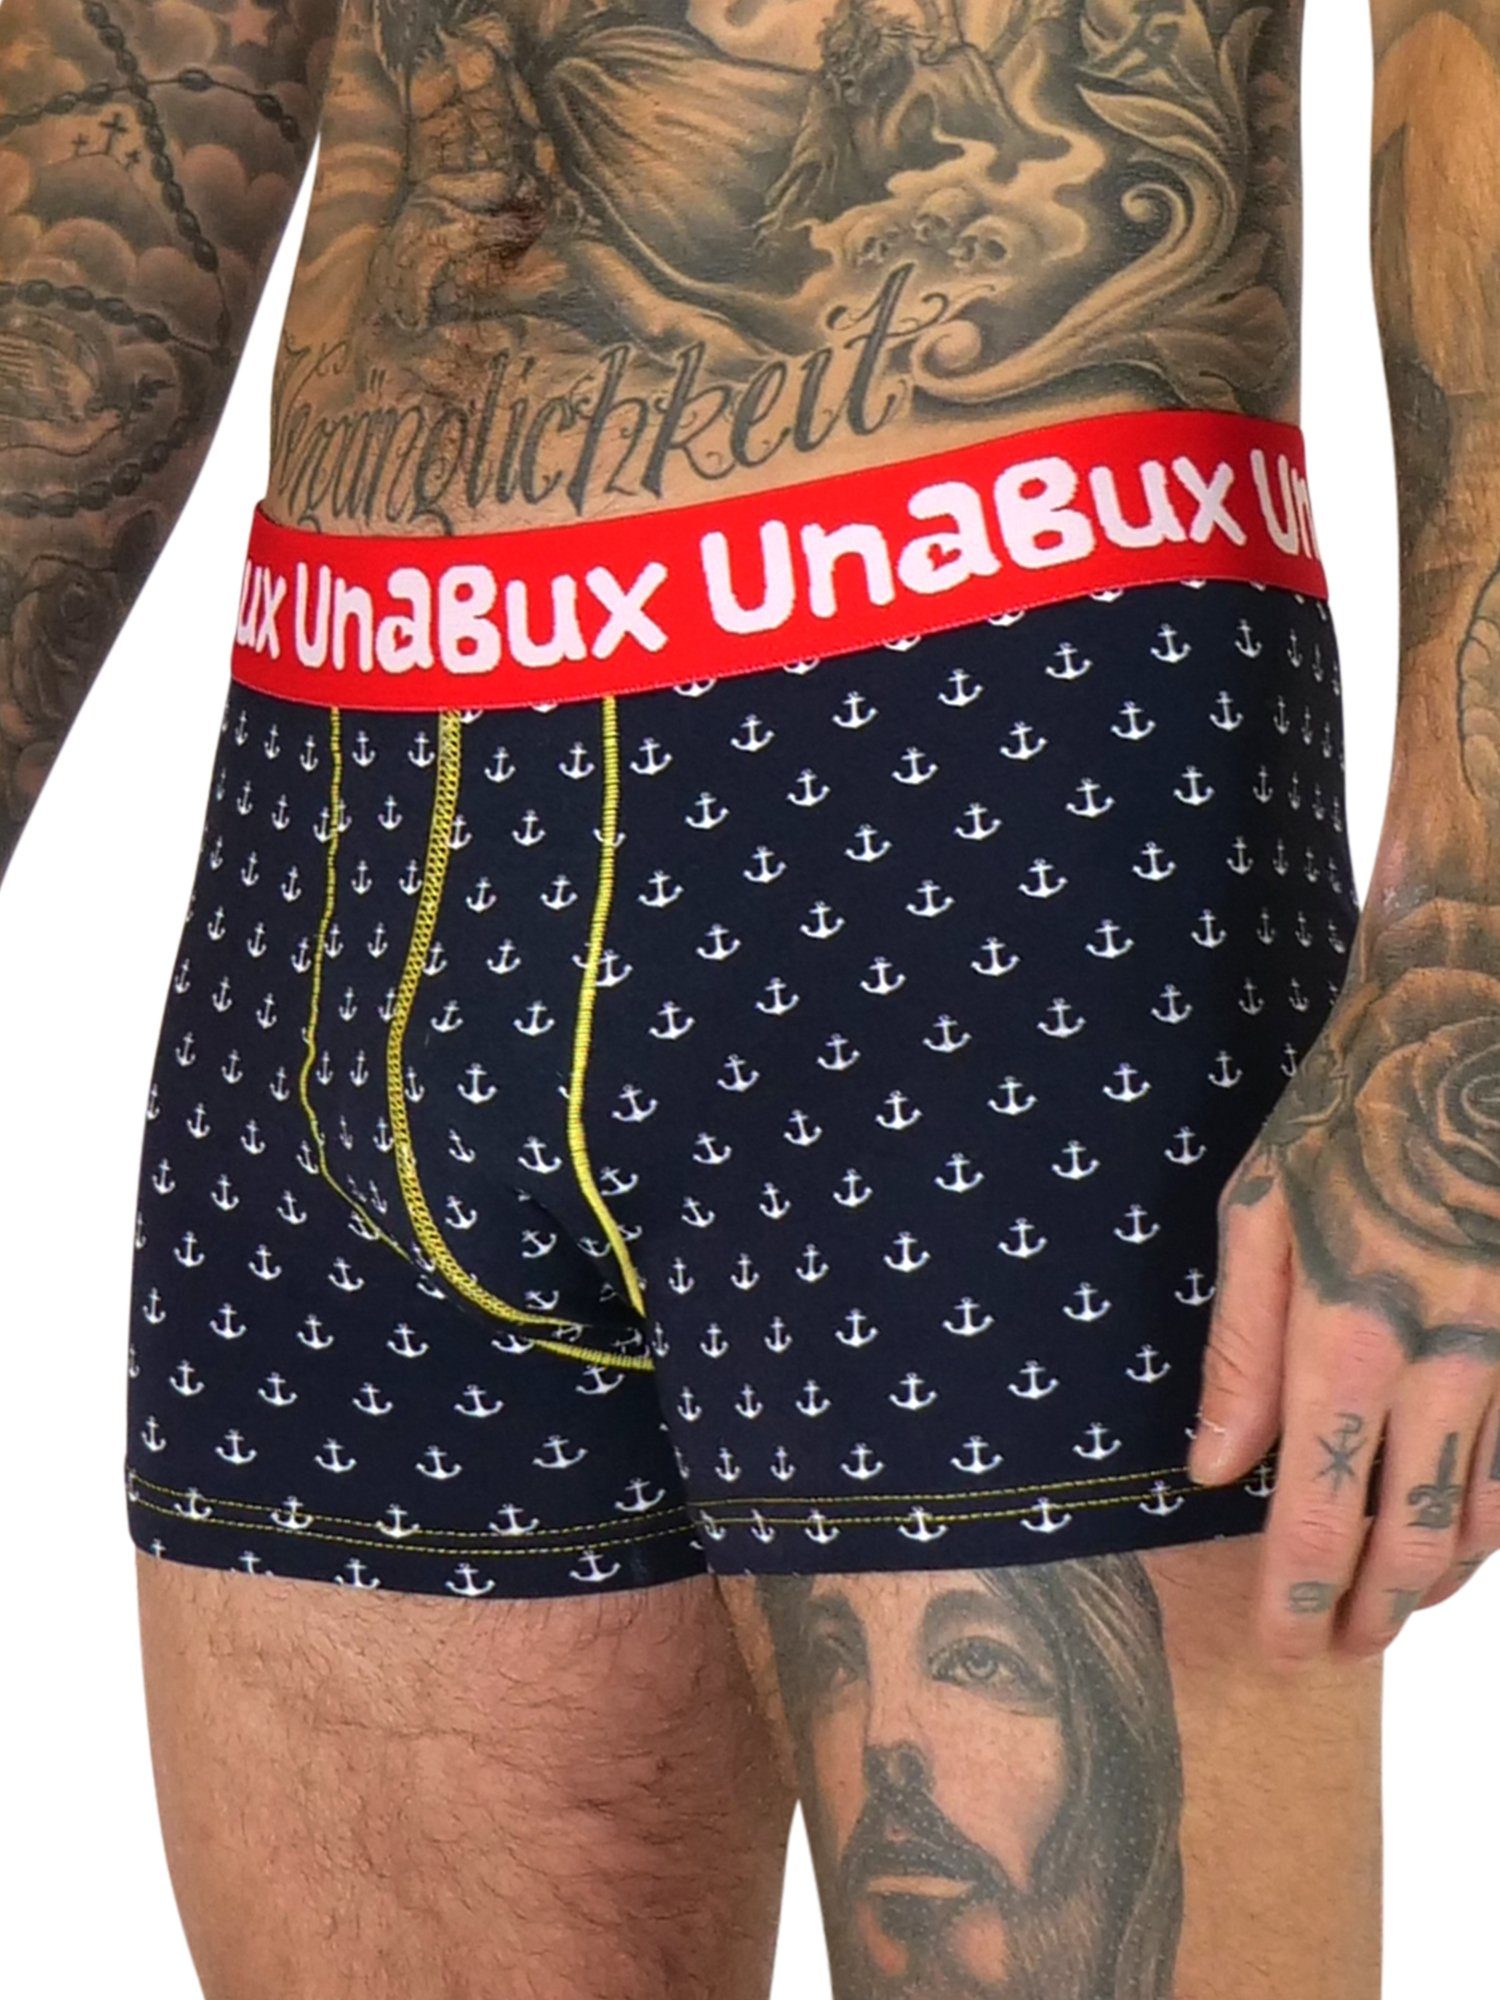 FINGERS / OLD GOOD WOOLHEAD UnaBux (2-St) Doppelpack Briefs Boxer Boxershorts ANCHOR FIVE